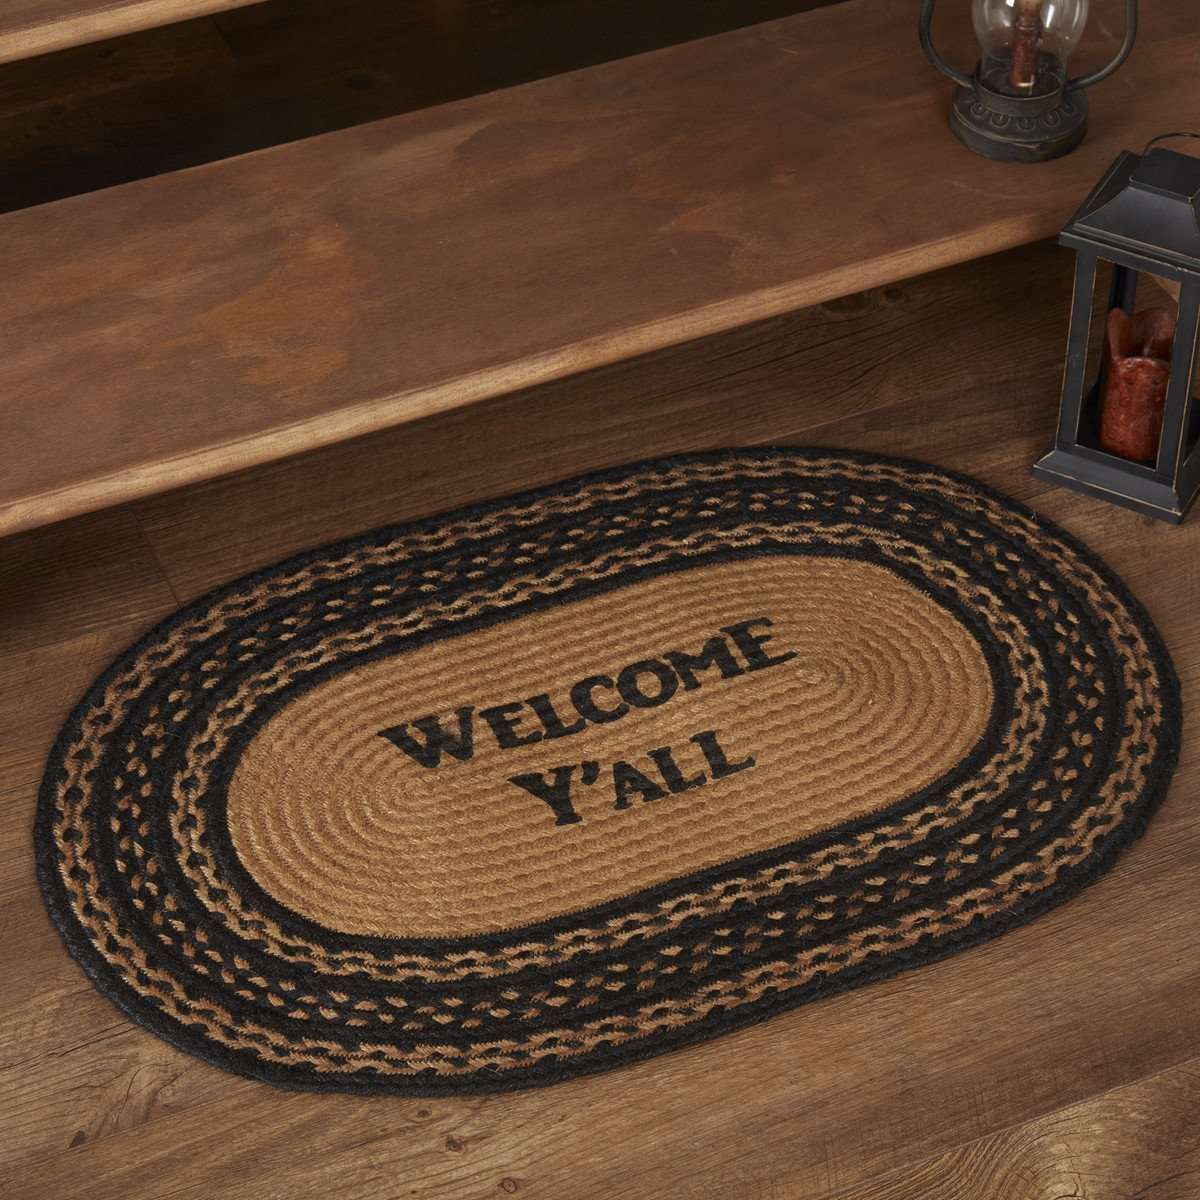 Farmhouse Braided Jute Rug Oval/Rect Stencil Welcome Y'all VHC Brands rugs VHC Brands 